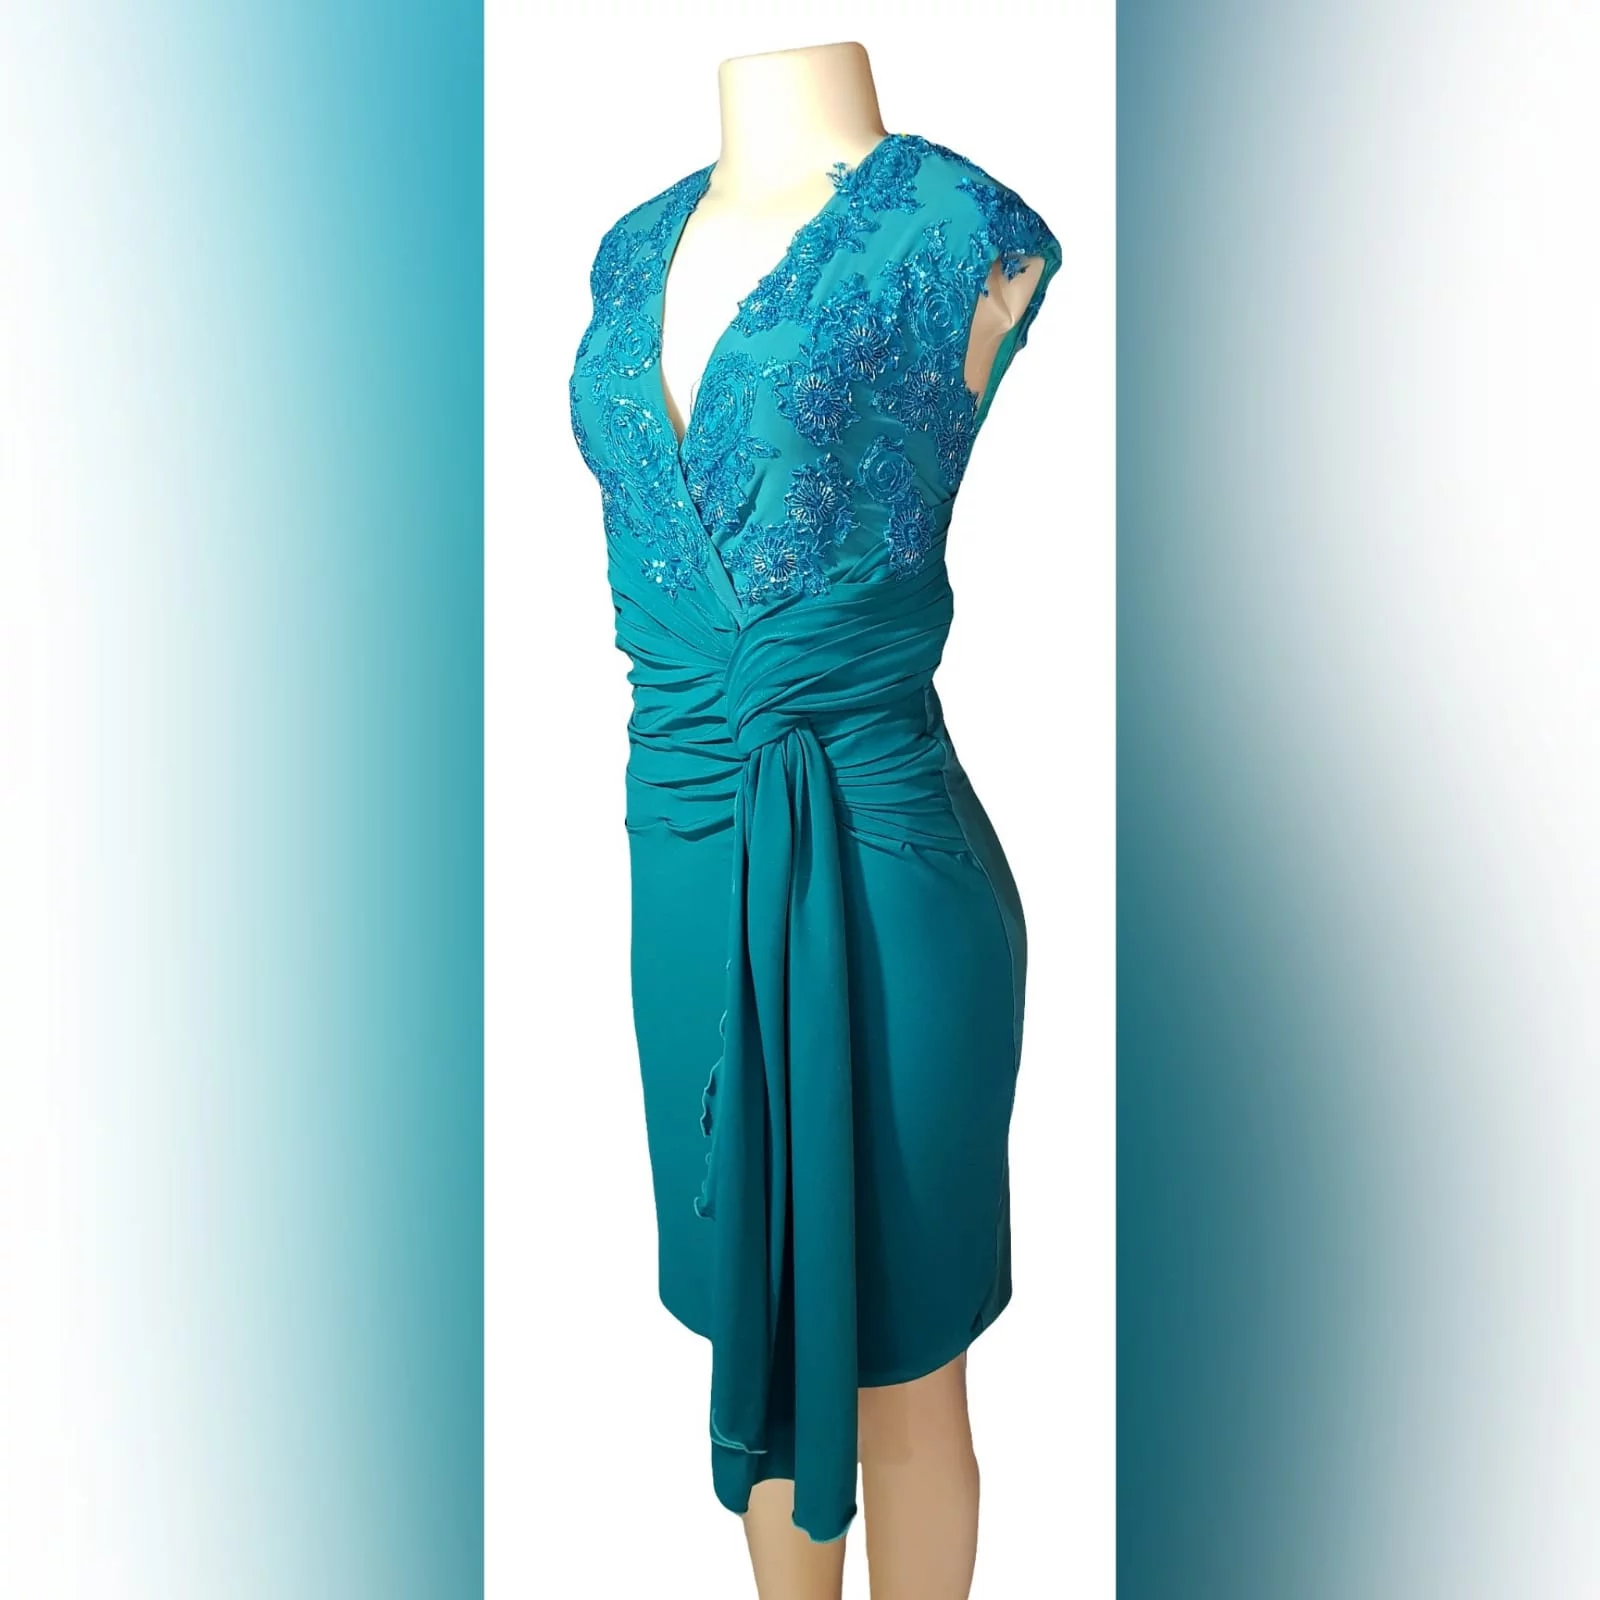 Pencil fit turquoise knee length formal dress 2 a pencil fit turquoise knee length formal dress, created for a wedding for mother of bride. This simple elegant design has a crossed v neckline detailed with beaded lace. A ruched belt with ends on the side over the dress.